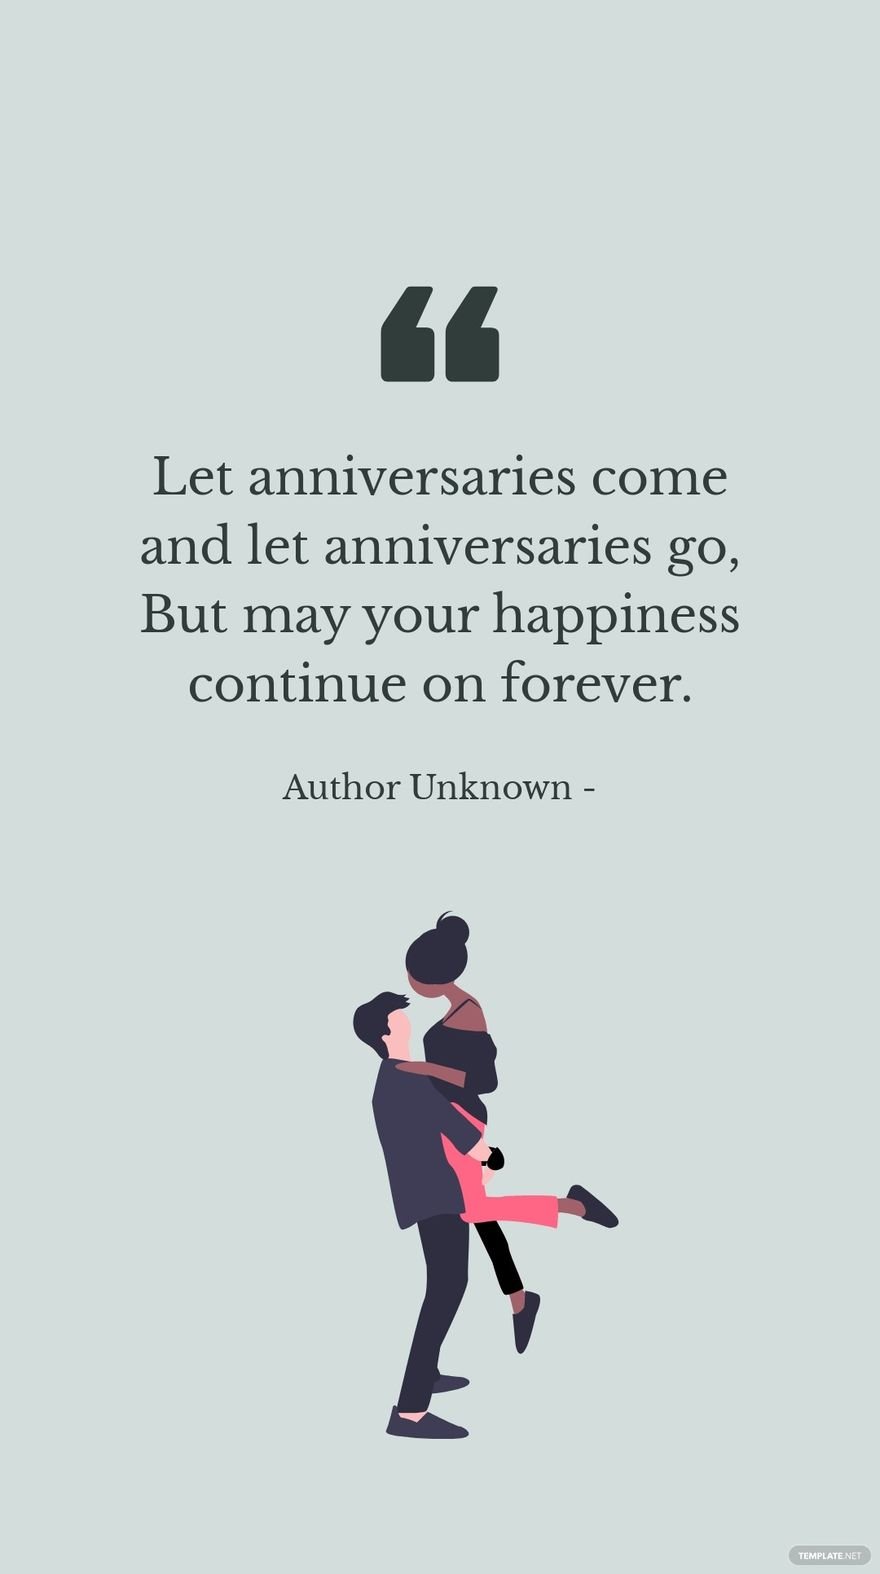 Free Author Unknown - Let anniversaries come and let anniversaries go, But may your happiness continue on forever.